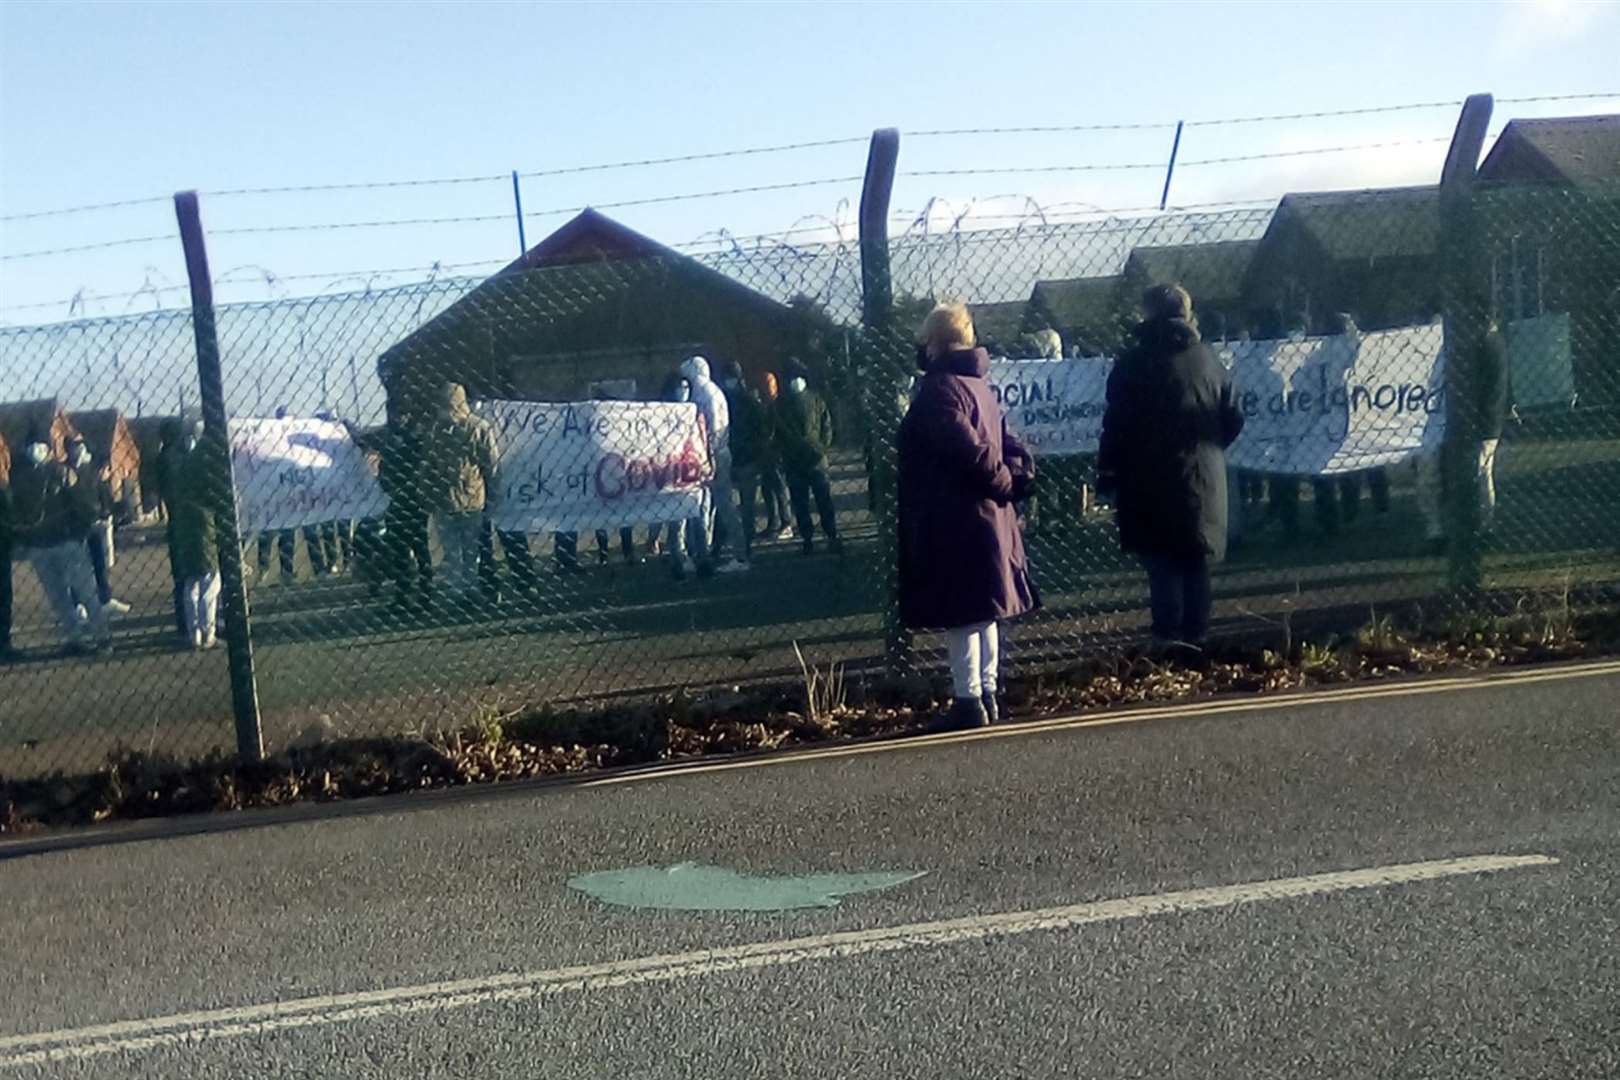 Asylum seekers have continually protested conditions following a large Covid outbreak hit the barracks